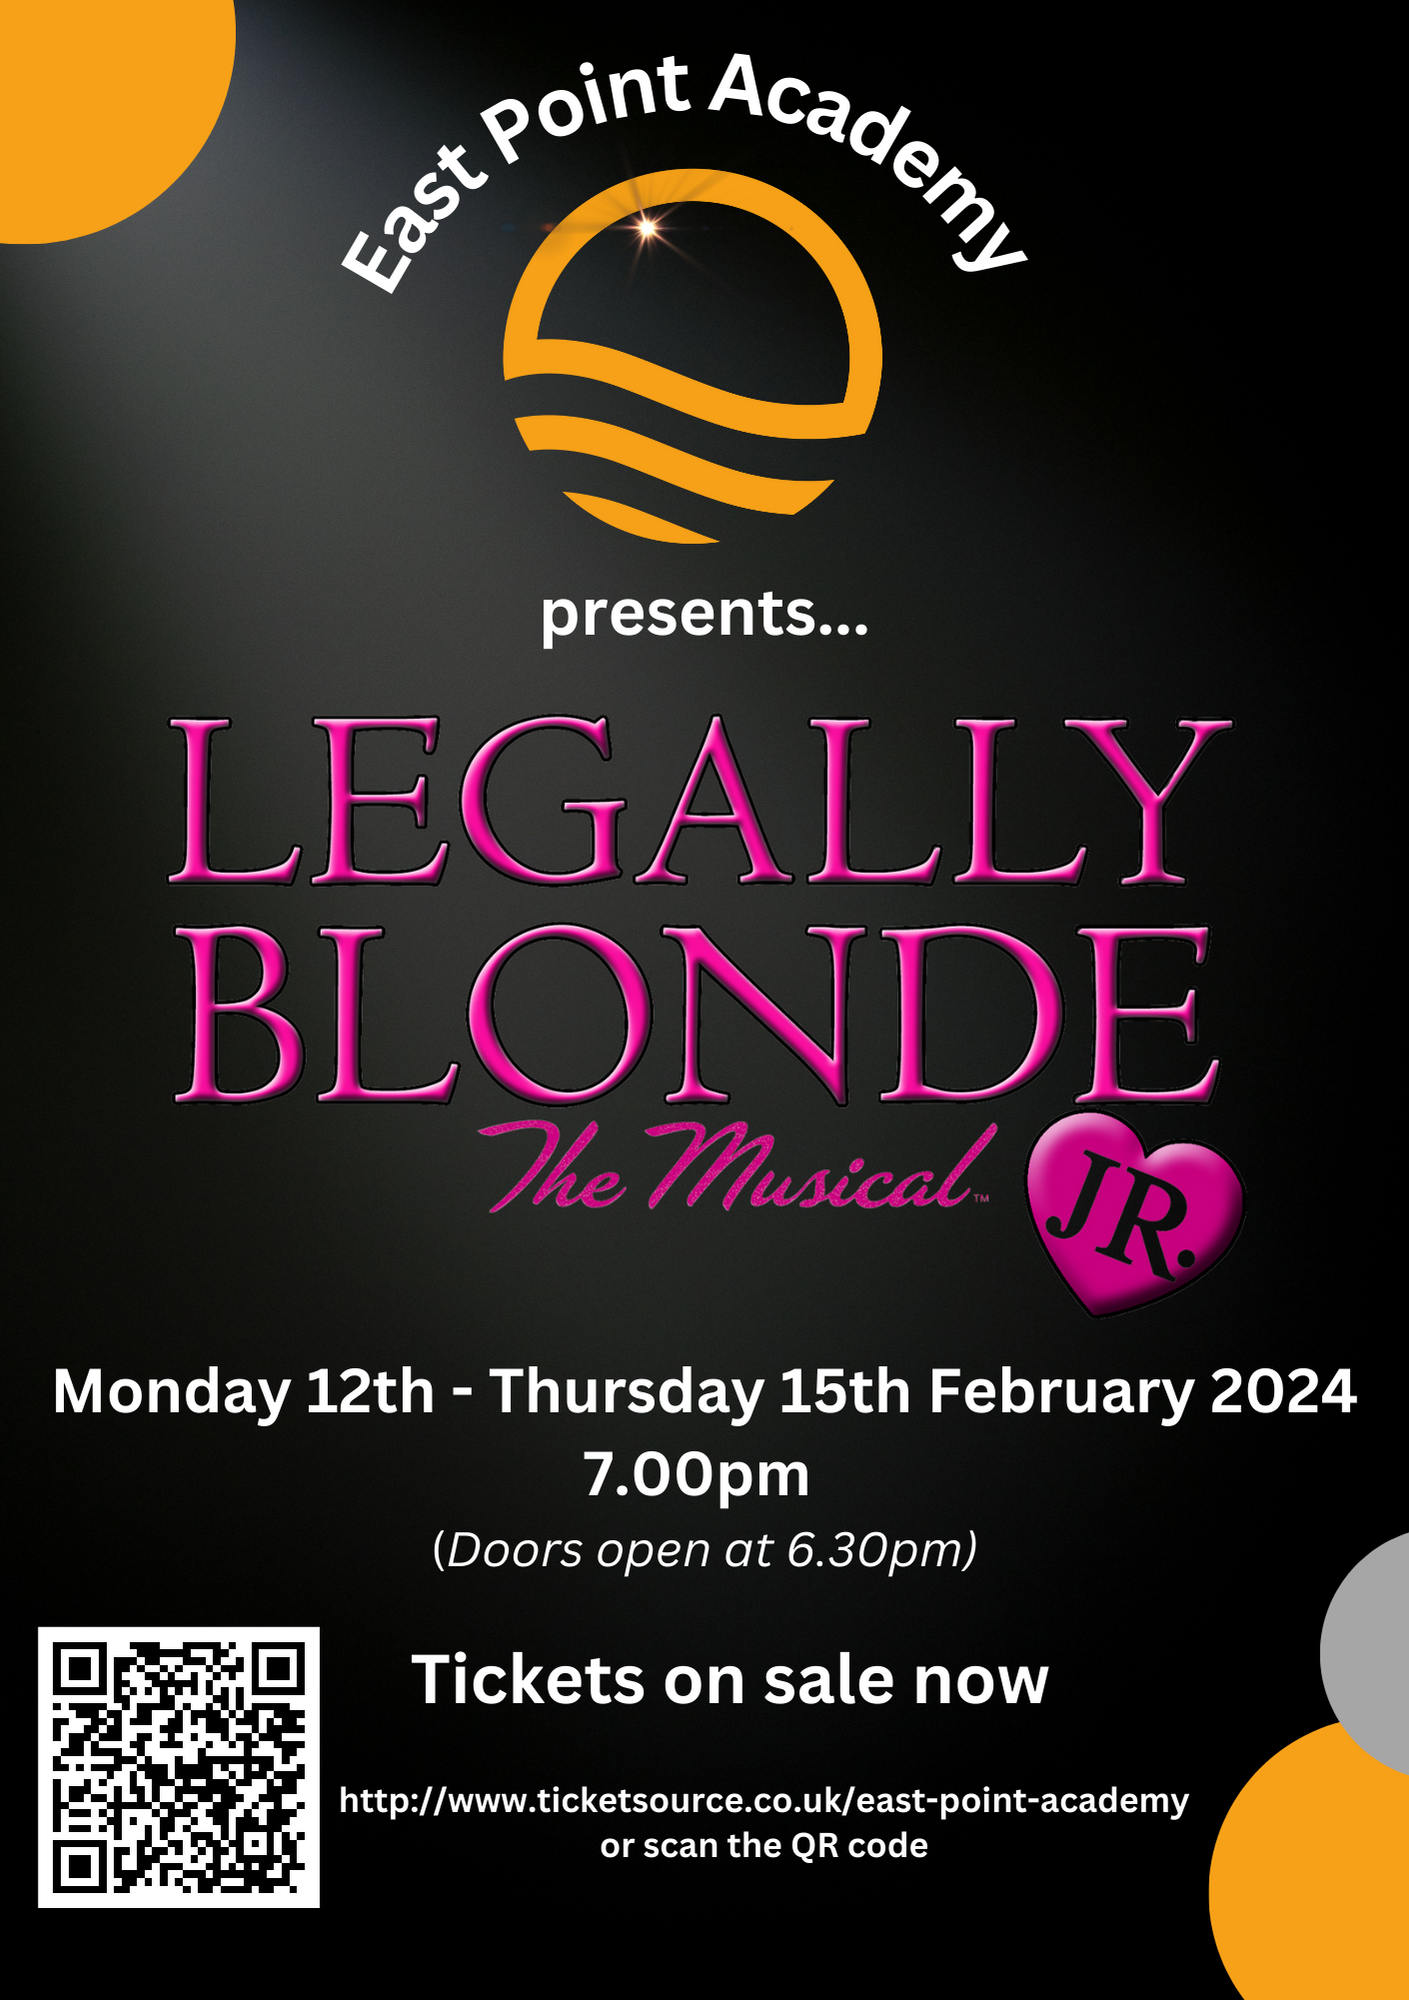 Legally Blonde A5 flyer